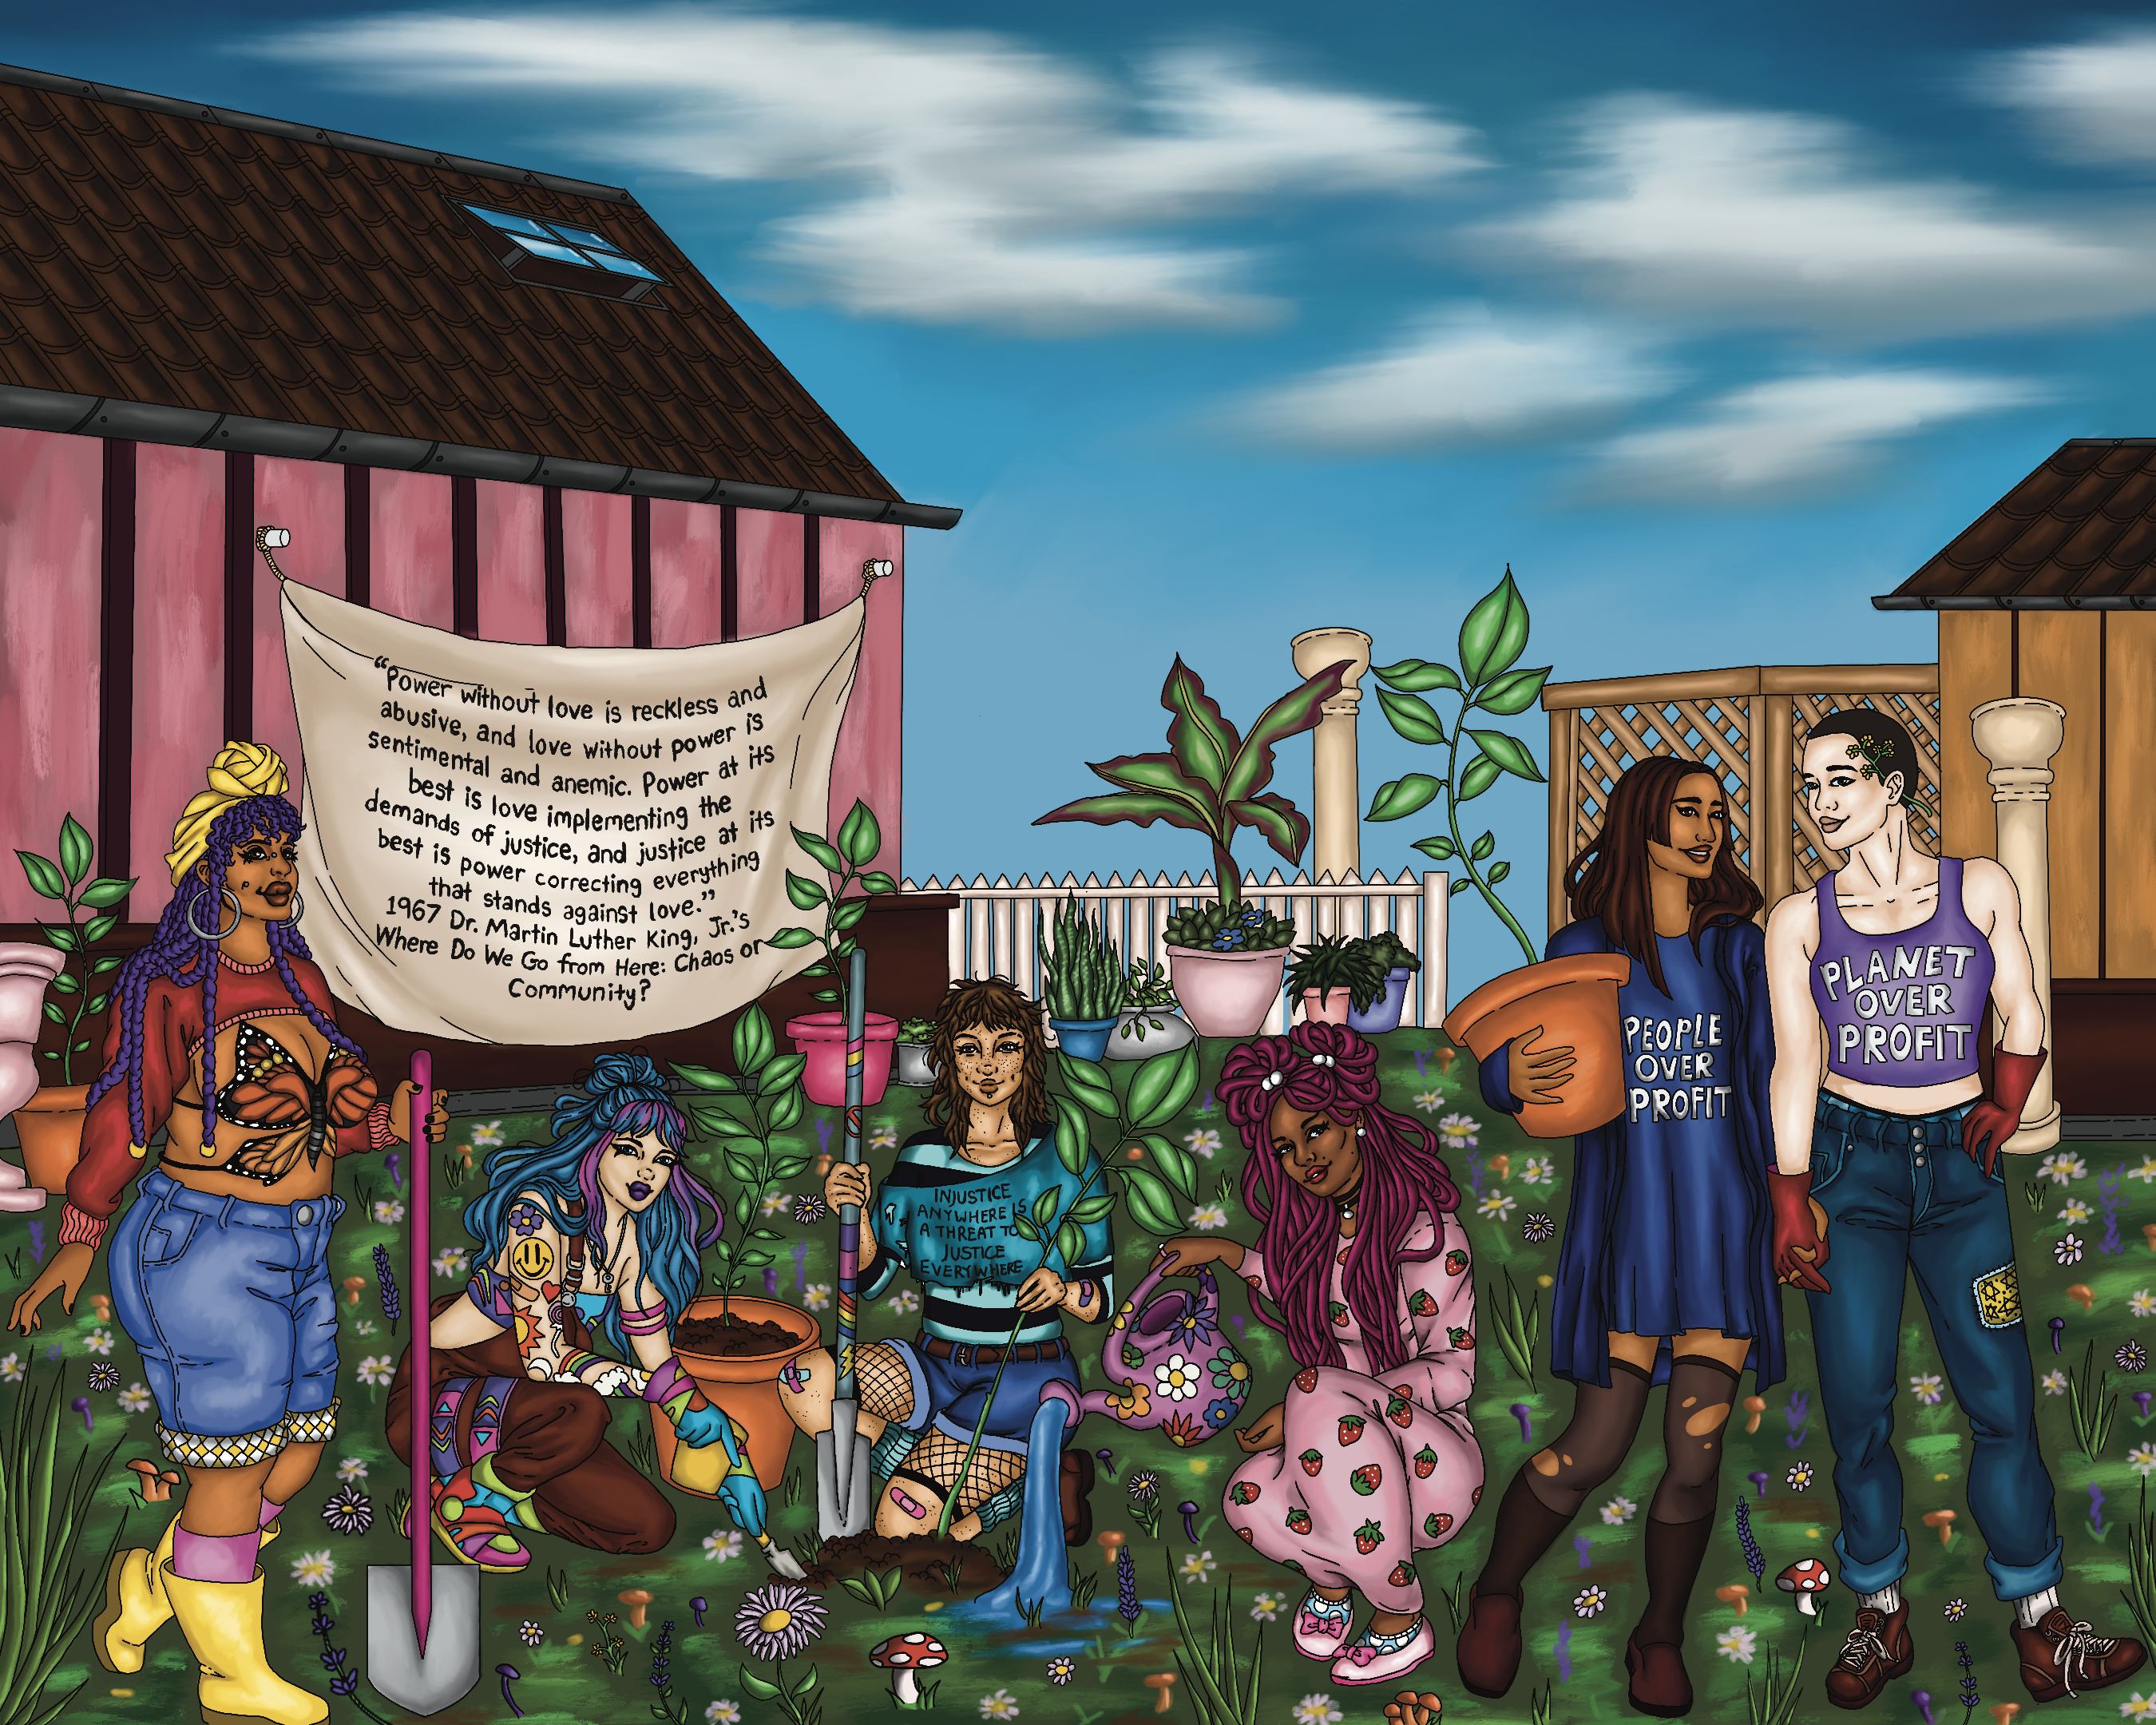 An image of queer activists tending to a garden with a quote by Dr. Martin Luther King, Jr.